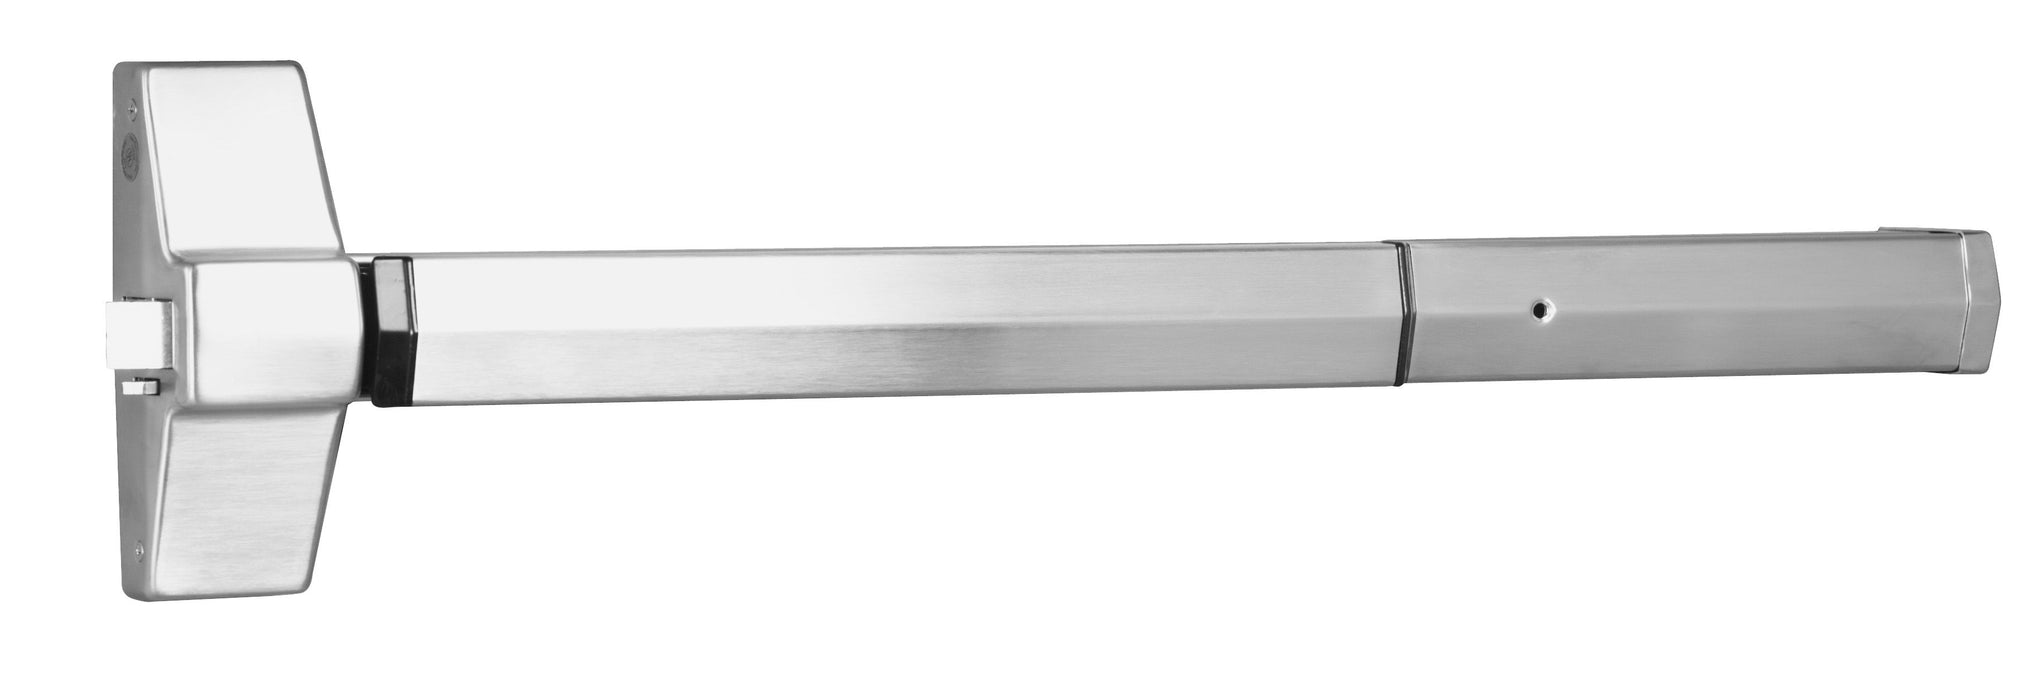 Yale Commercial 7100F48630 Fire Rated 4' Rim Exit Only Exit Device US32D (630) Satin Stainless Steel Finish